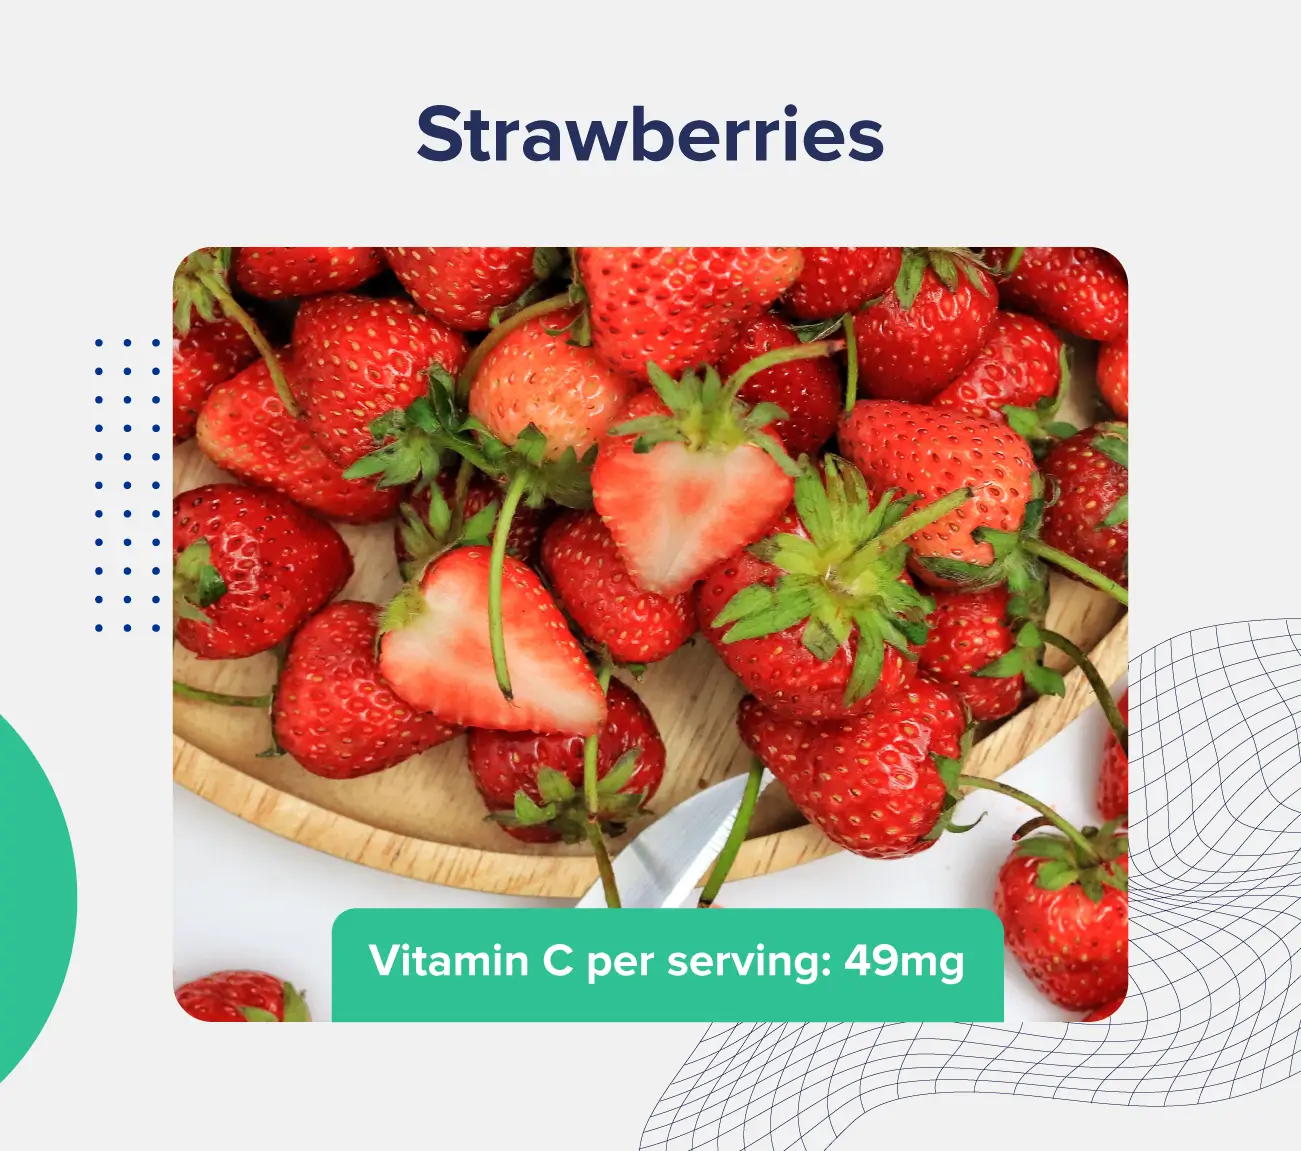 A graphic entitled "strawberries" depicting an assortment of cut and whole strawberries on a wooden plate with vitamin C content listed (49 milligrams per serving)